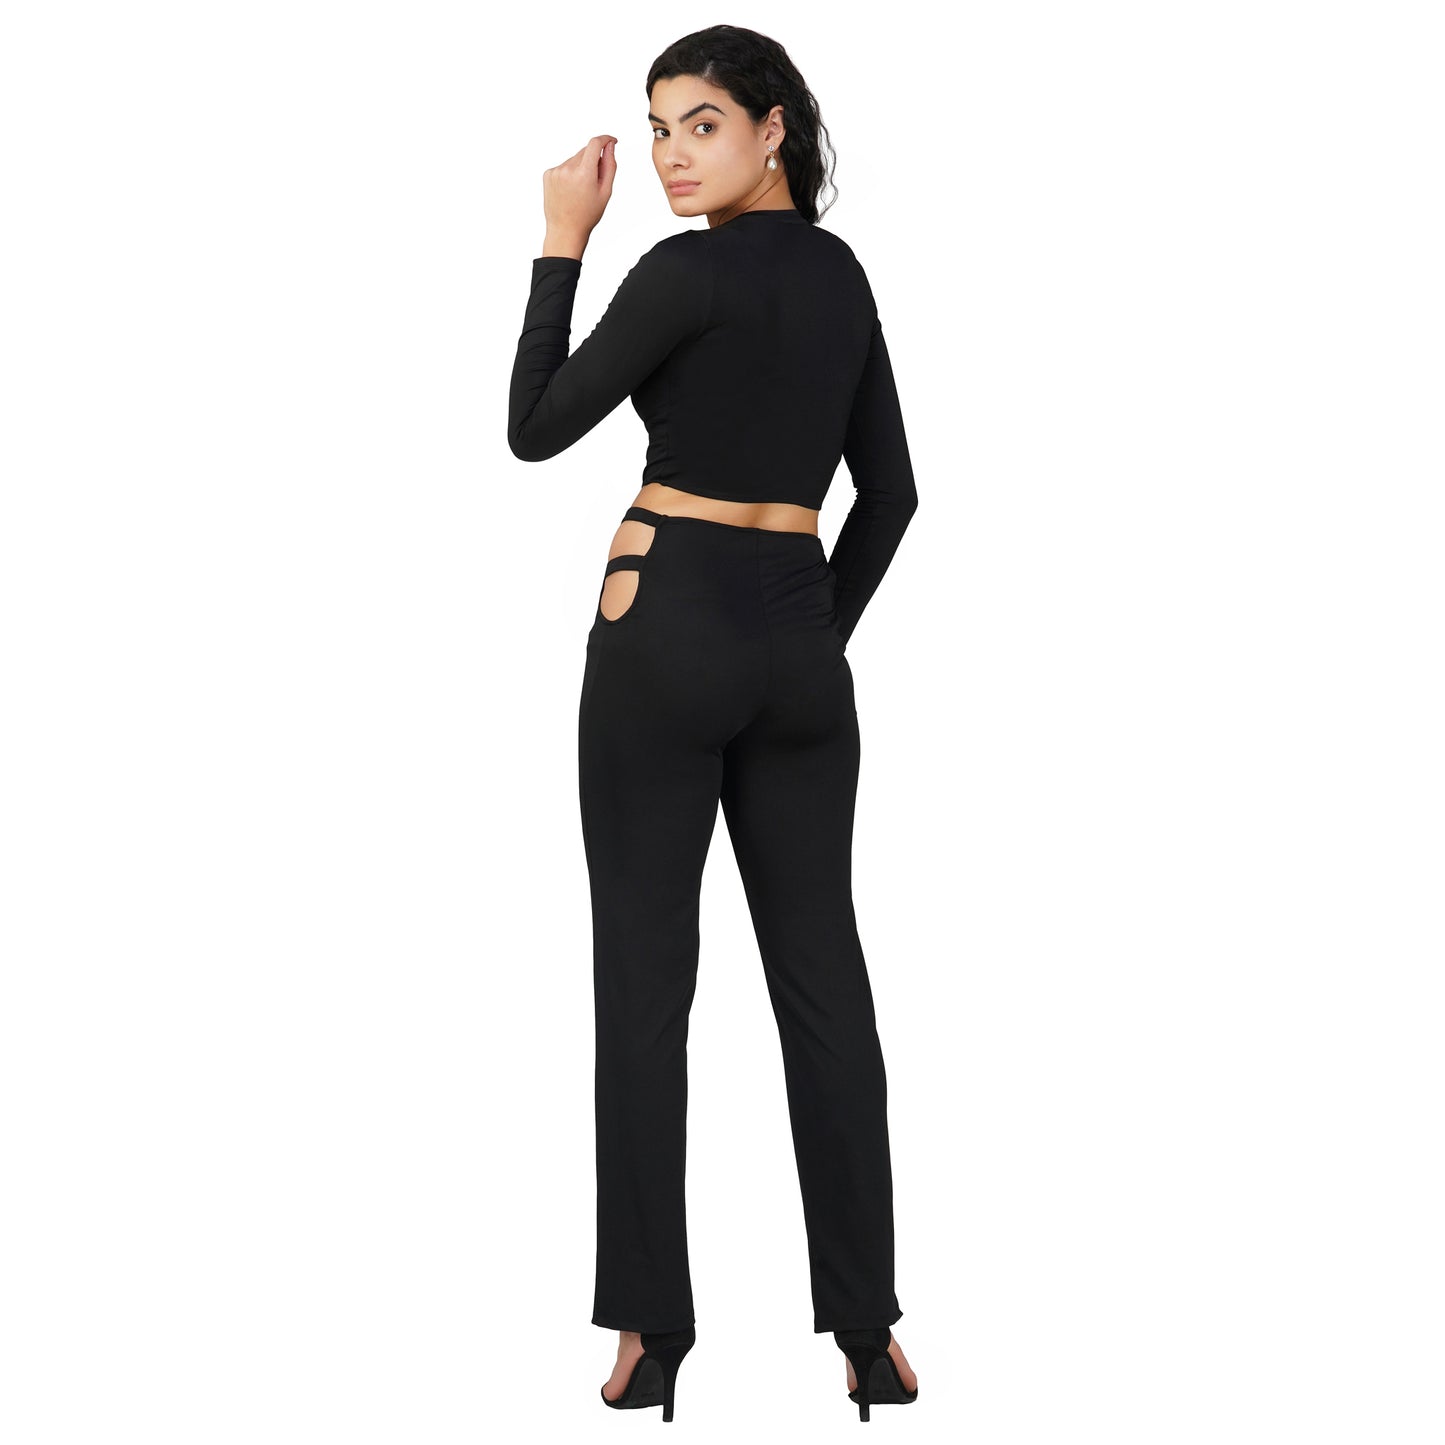 SLAY. Sport Women's Cutout Full Sleeves Crop Top And Pants Co-ord Set Black